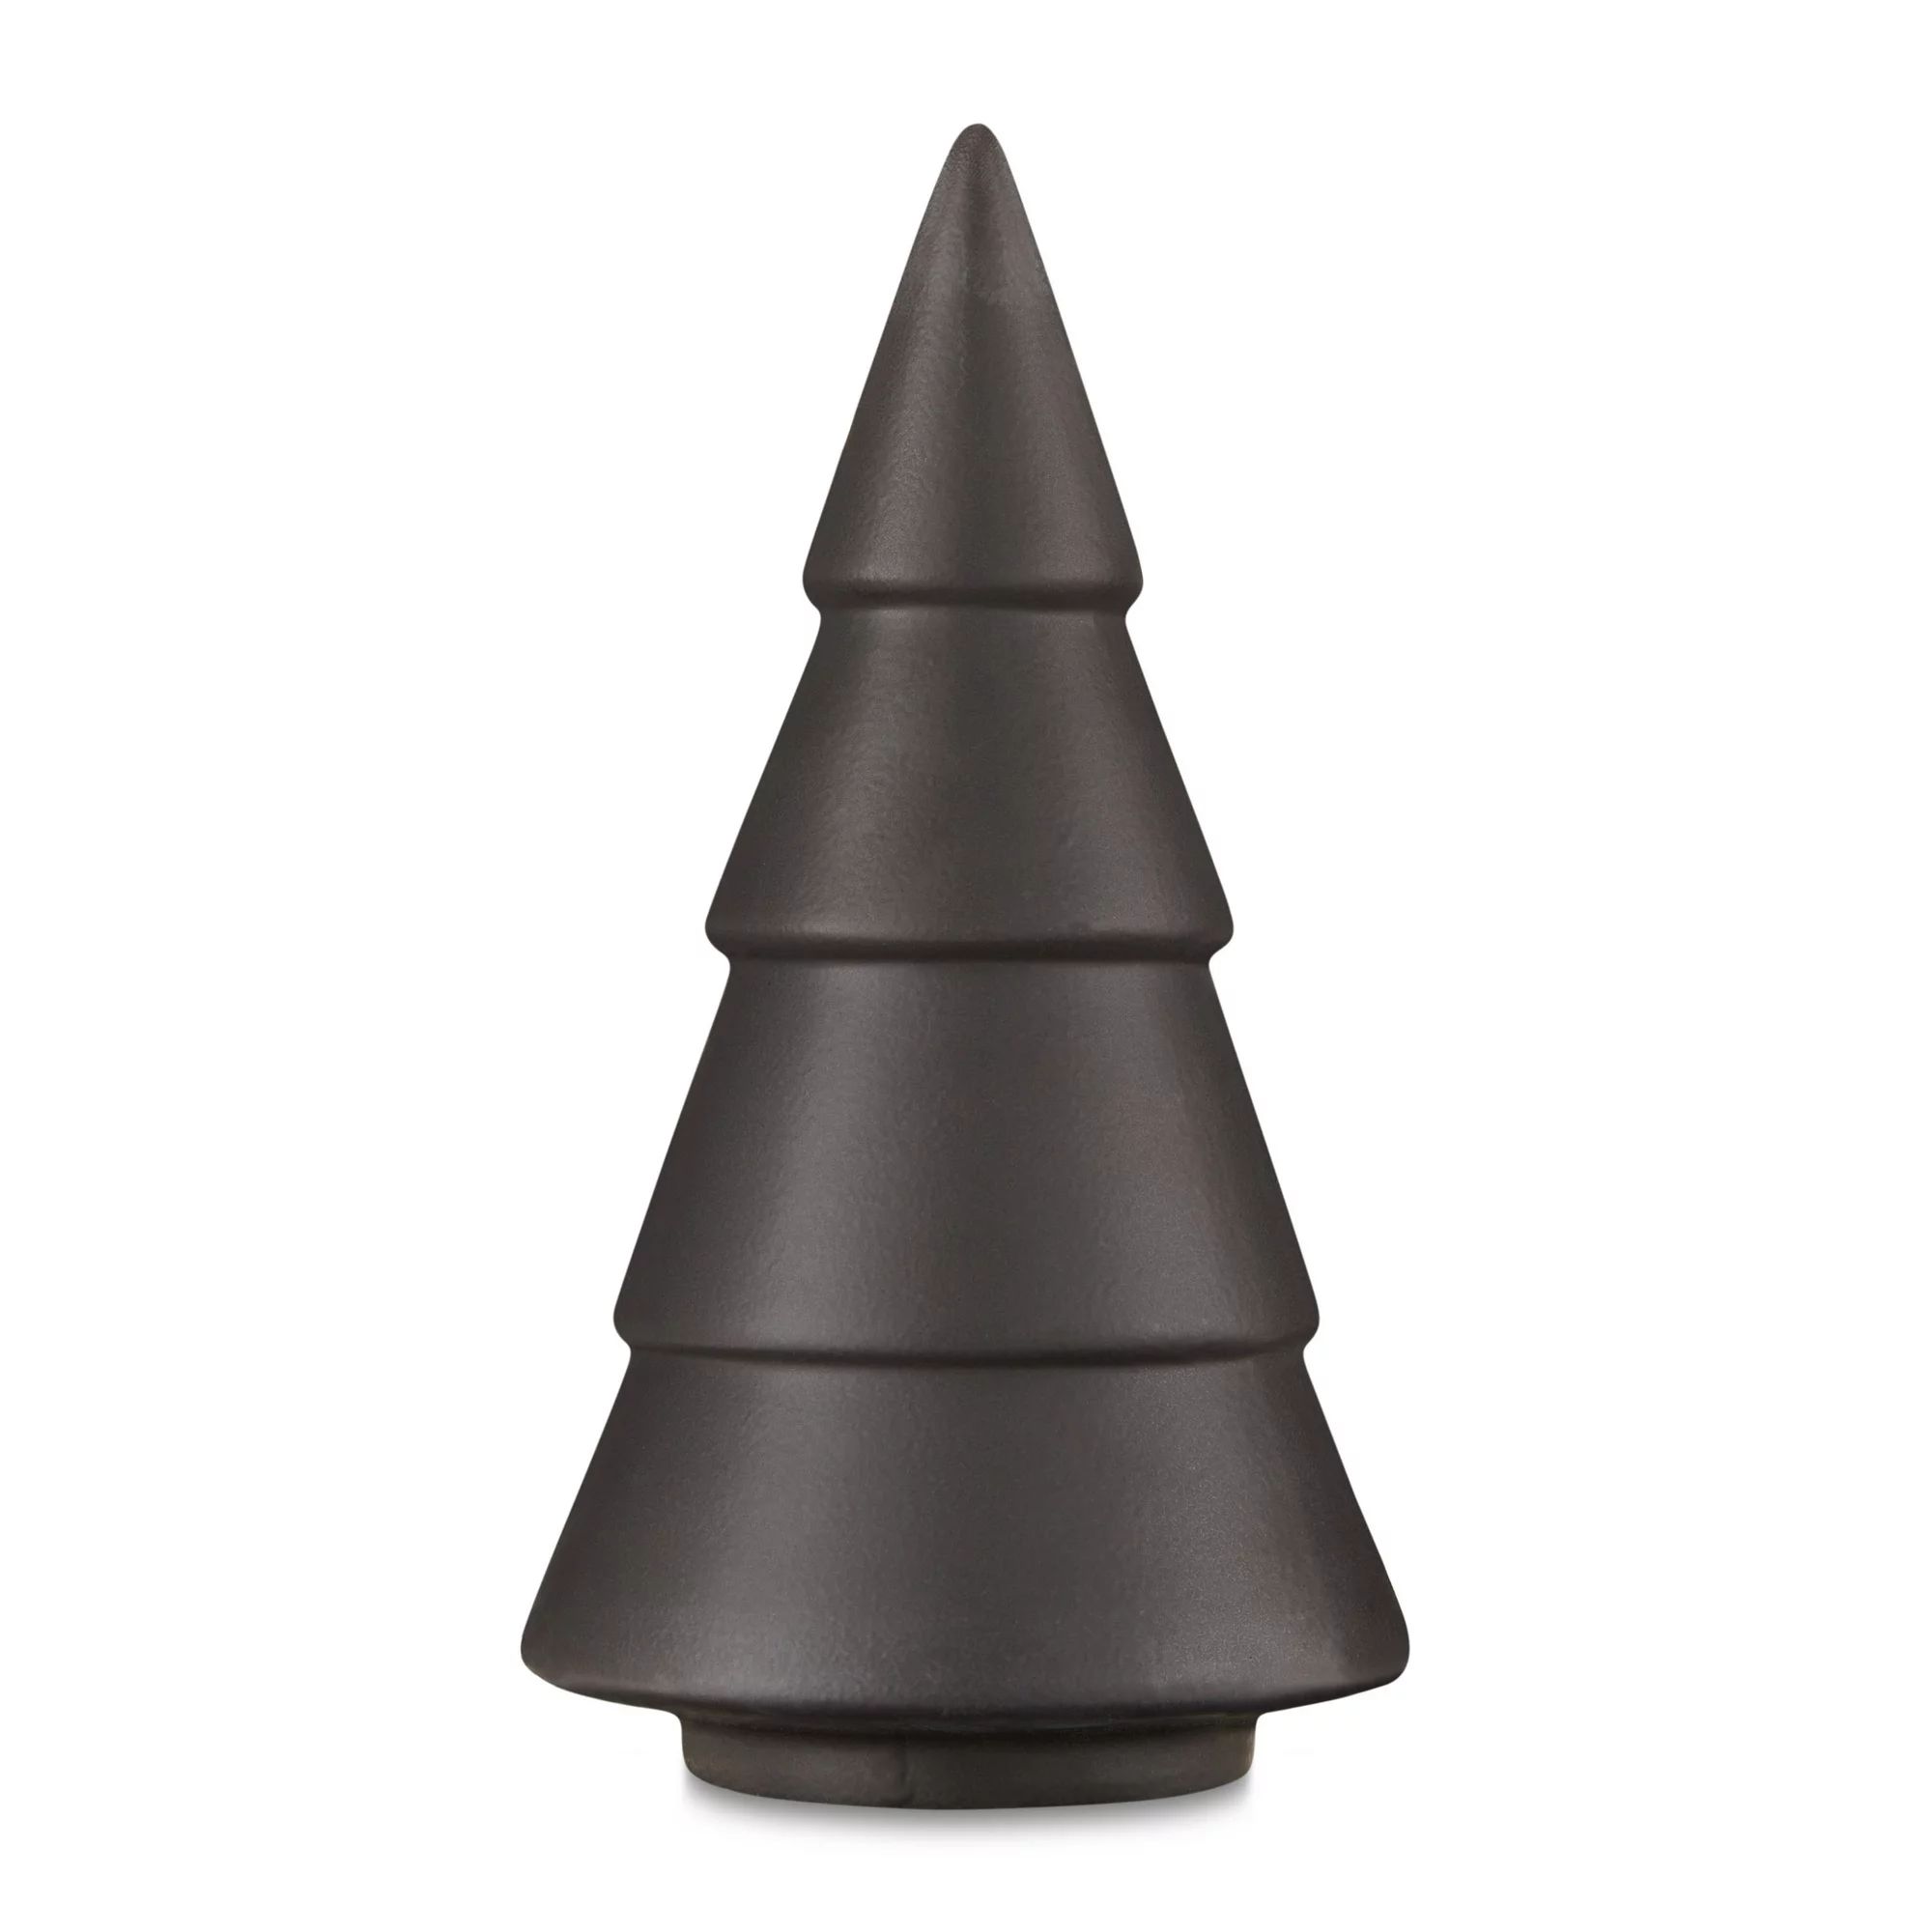 8 in Ceramic Tree Tabletop Christmas Decoration, Black, by Holiday Time | Walmart (US)